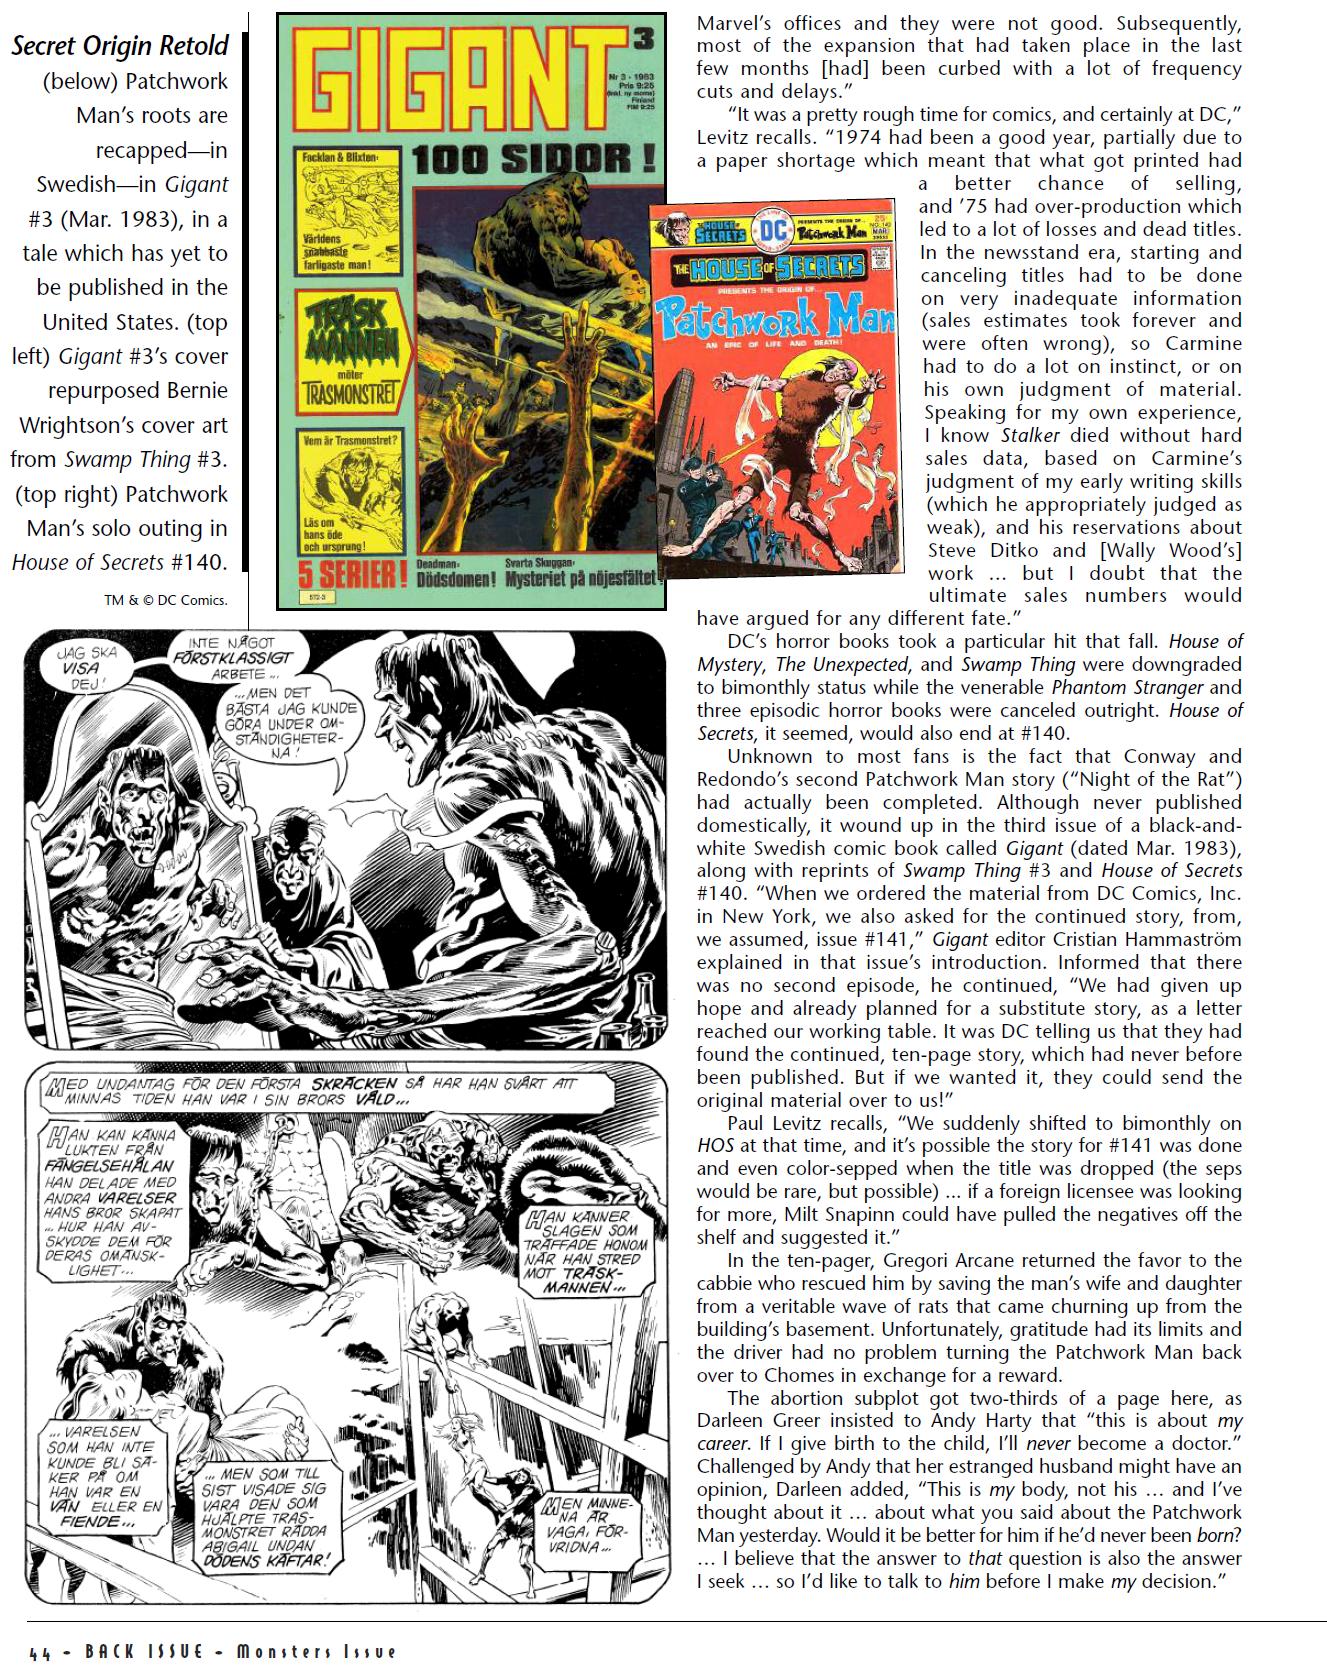 Read online Back Issue comic -  Issue #36 - 46